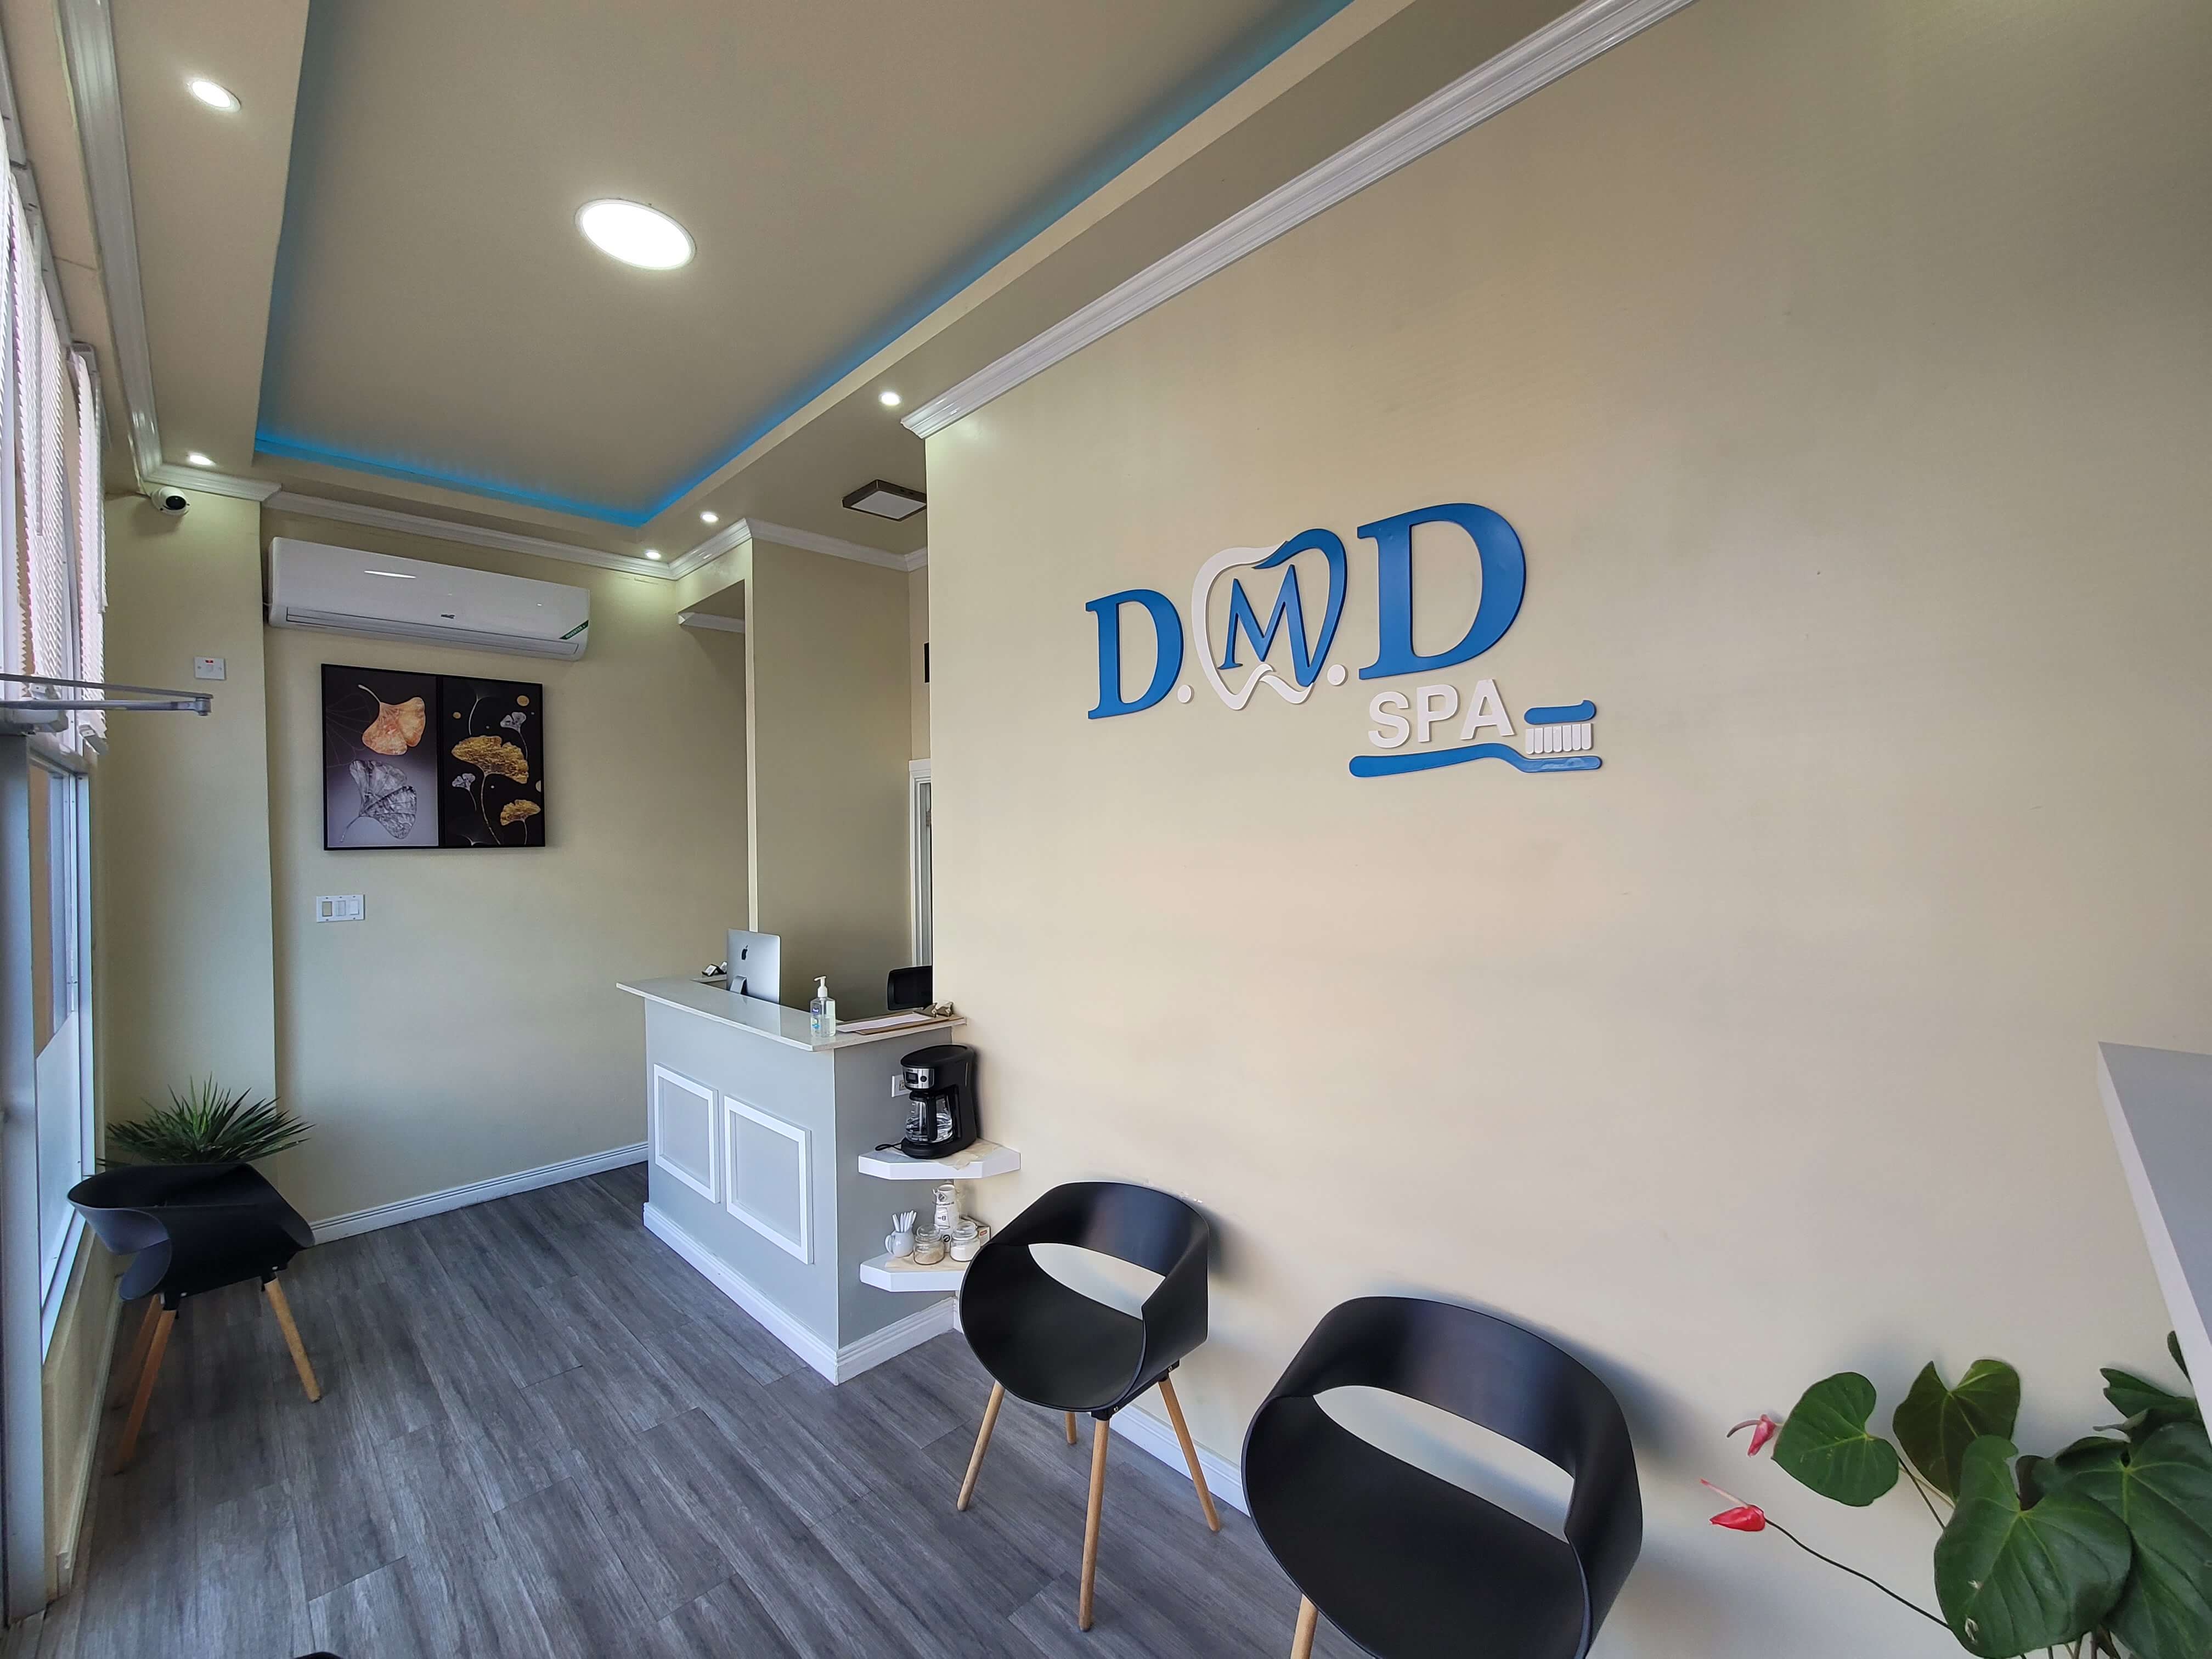 Book appointment with DMD Spa